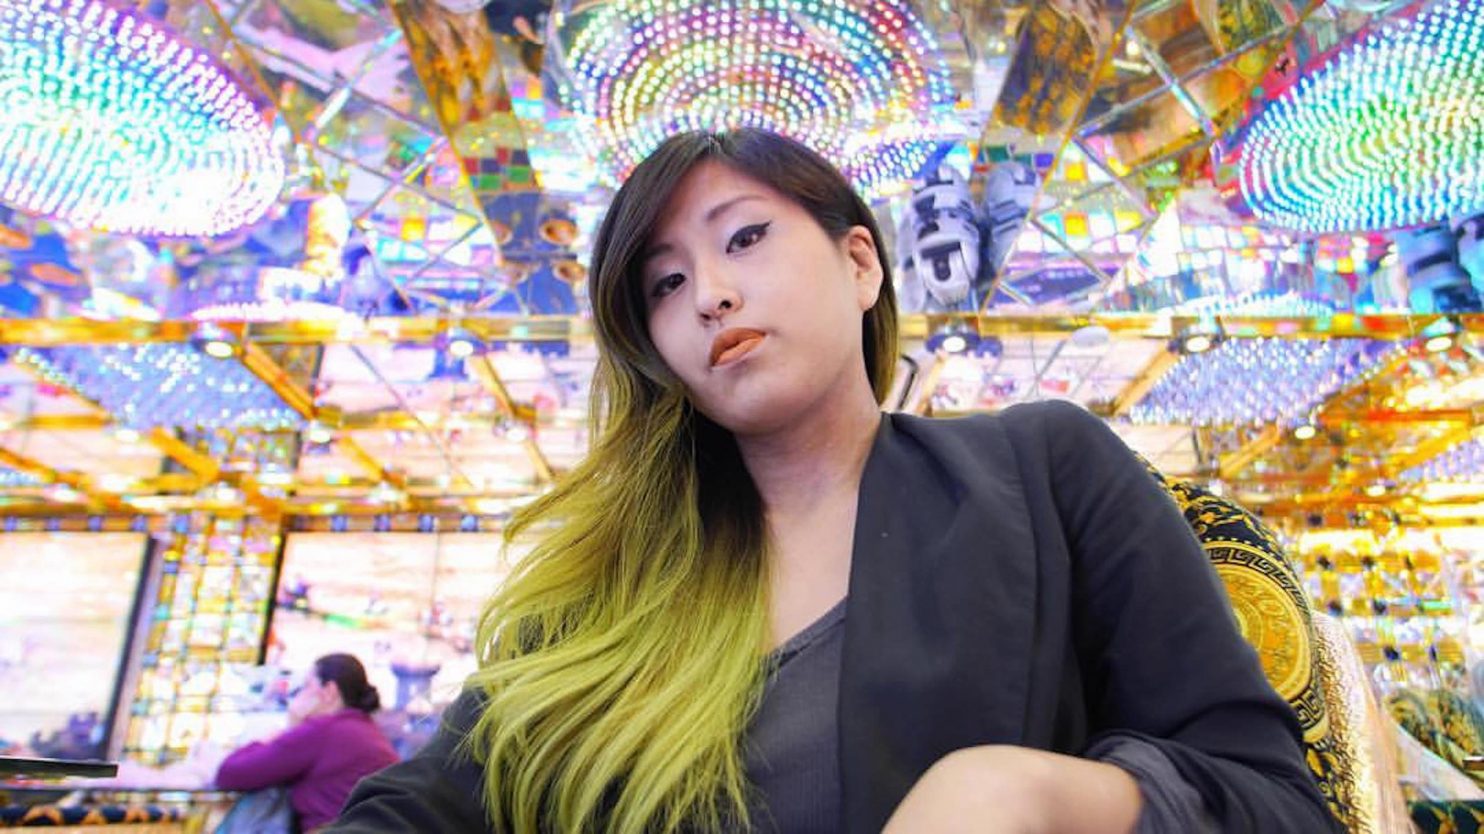 Yoko Okumura, pictured under a beautiful ceiling with multicolored light fixtures